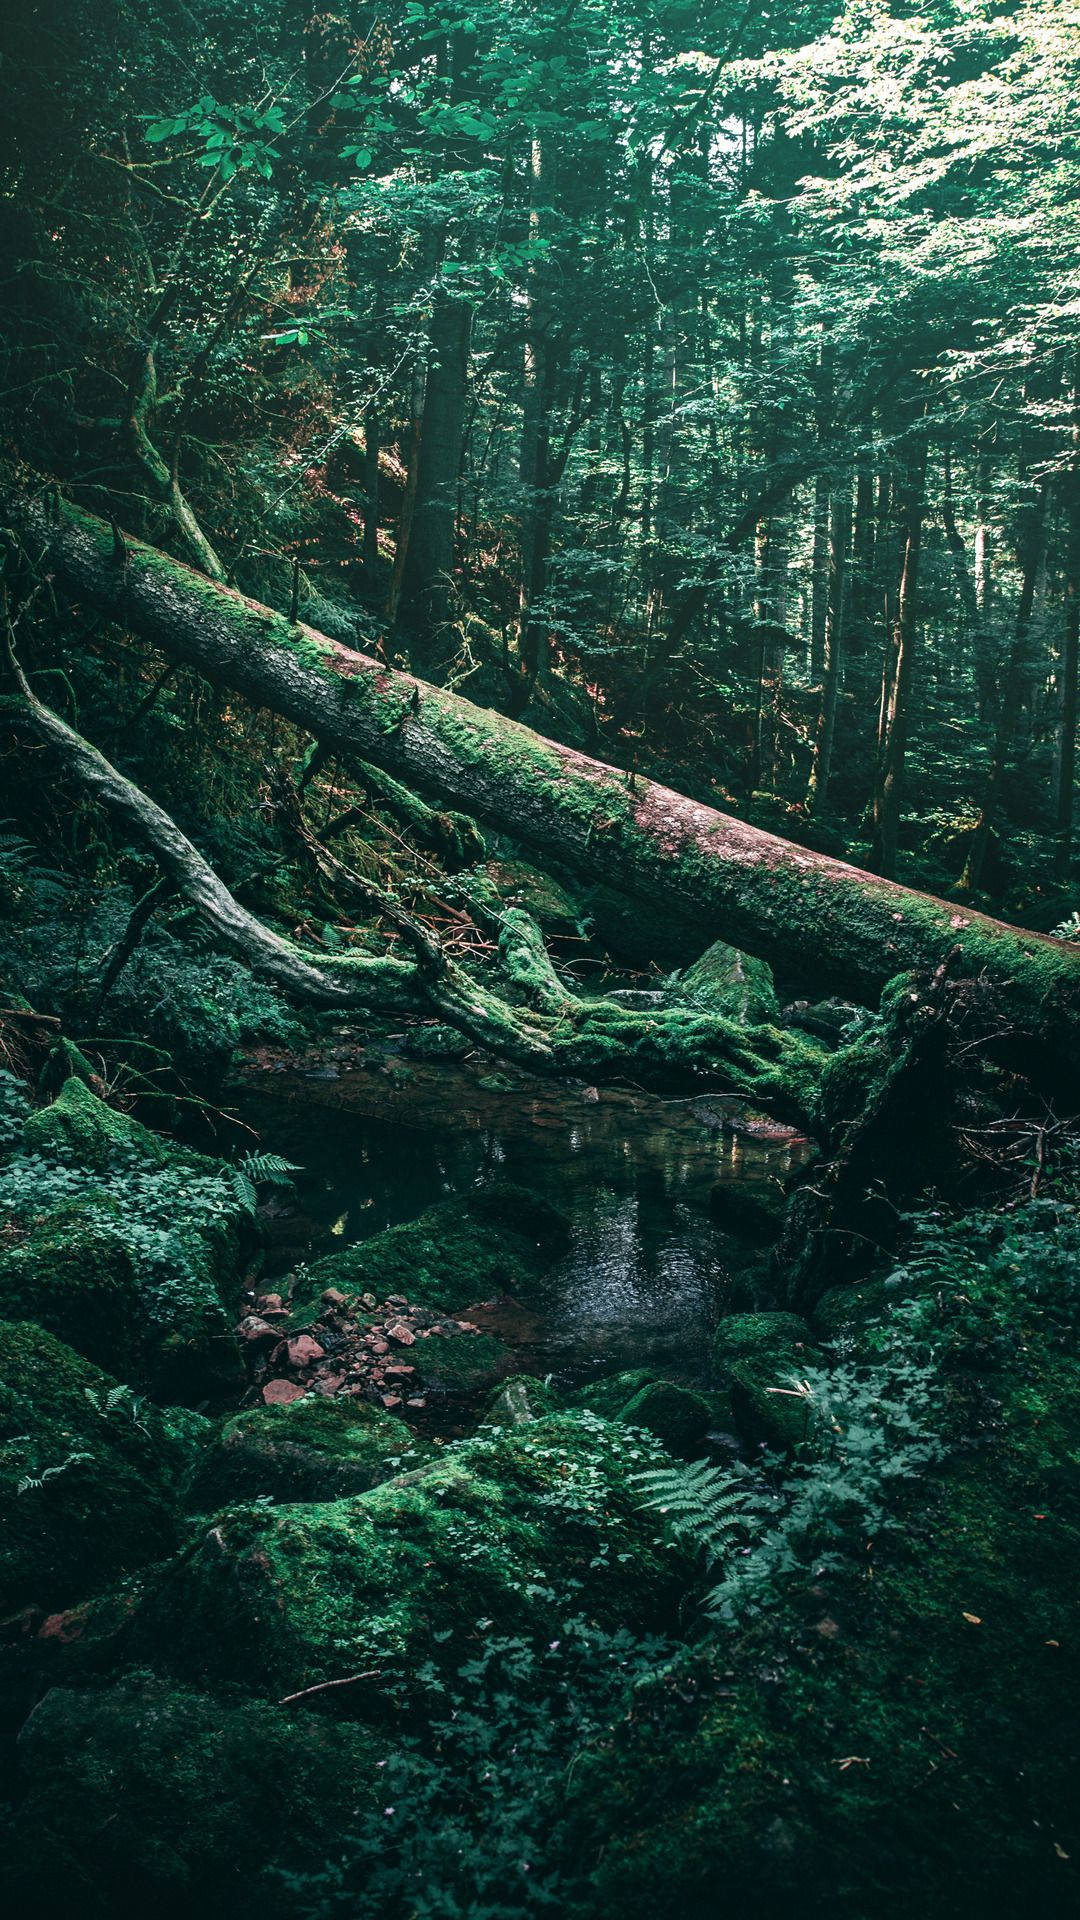 1000 Green Forest Pictures  Download Free Images on Unsplash